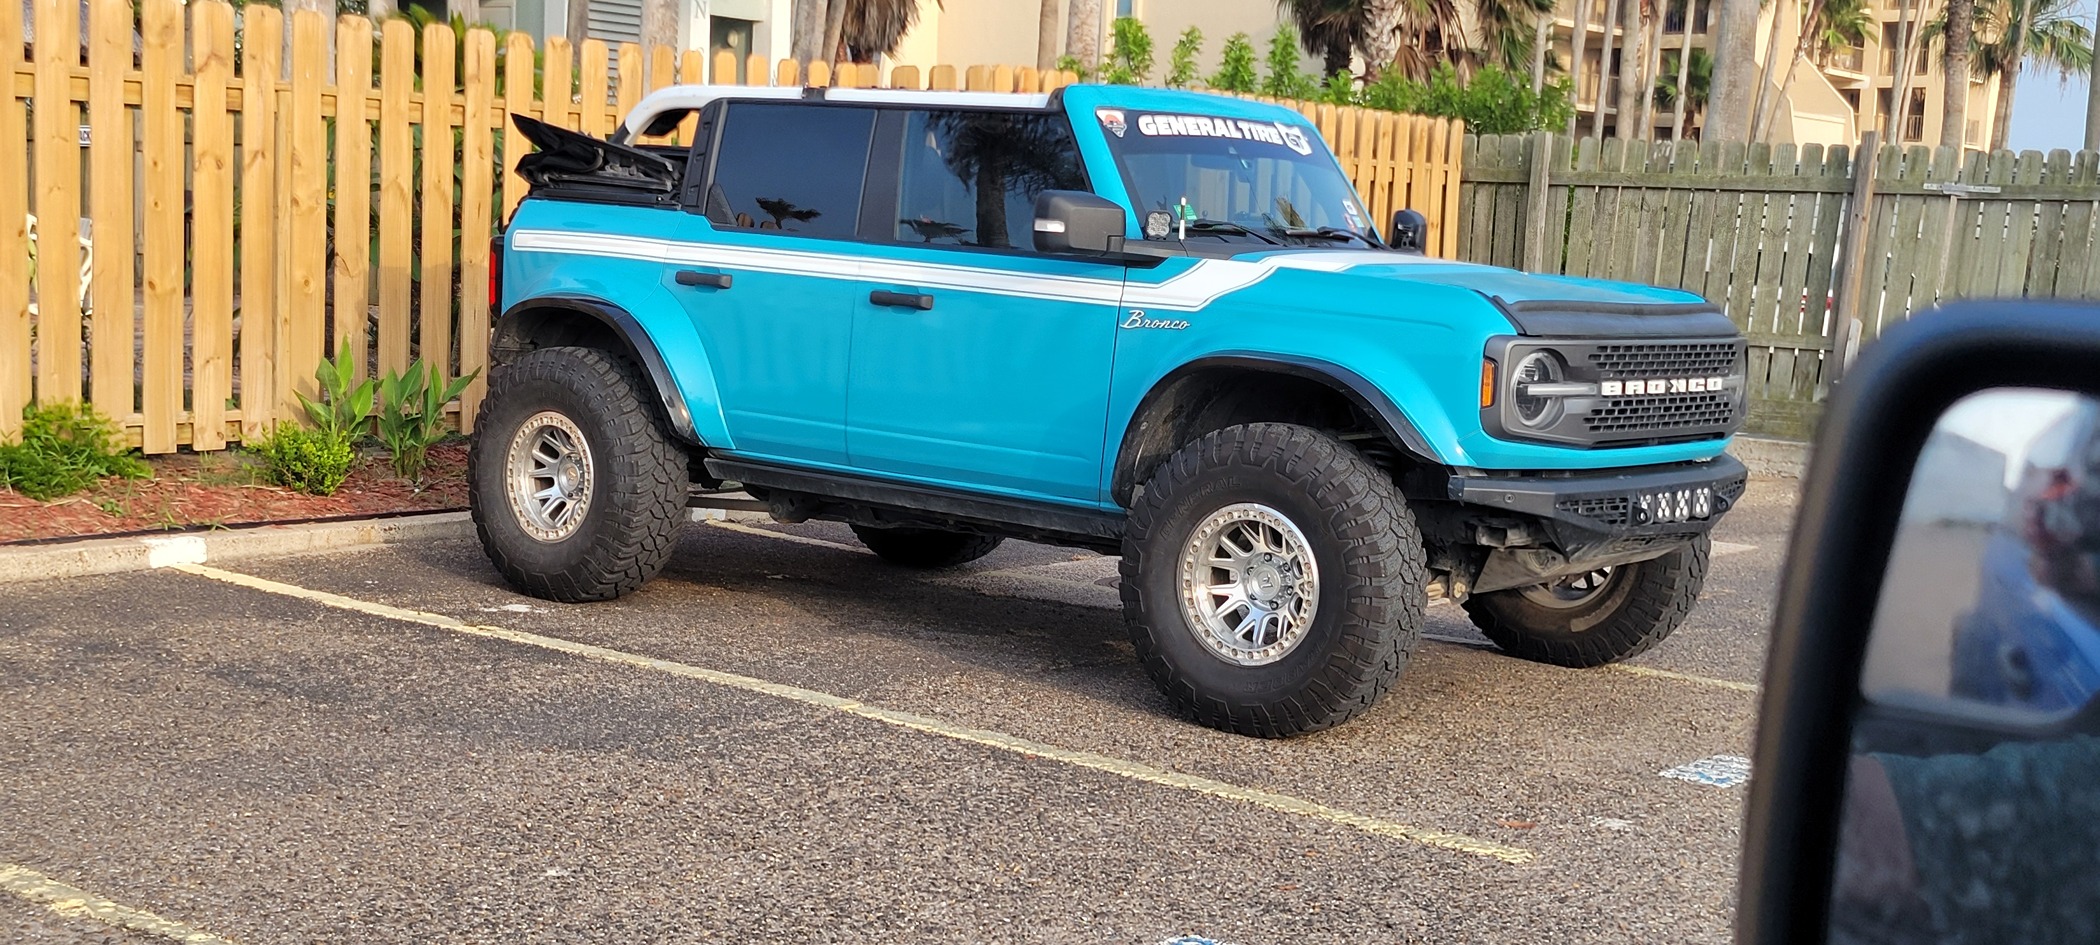 Ford Bronco Finally finished my Grabber Blue Bronco custom repaint! 😁 20240518_184719